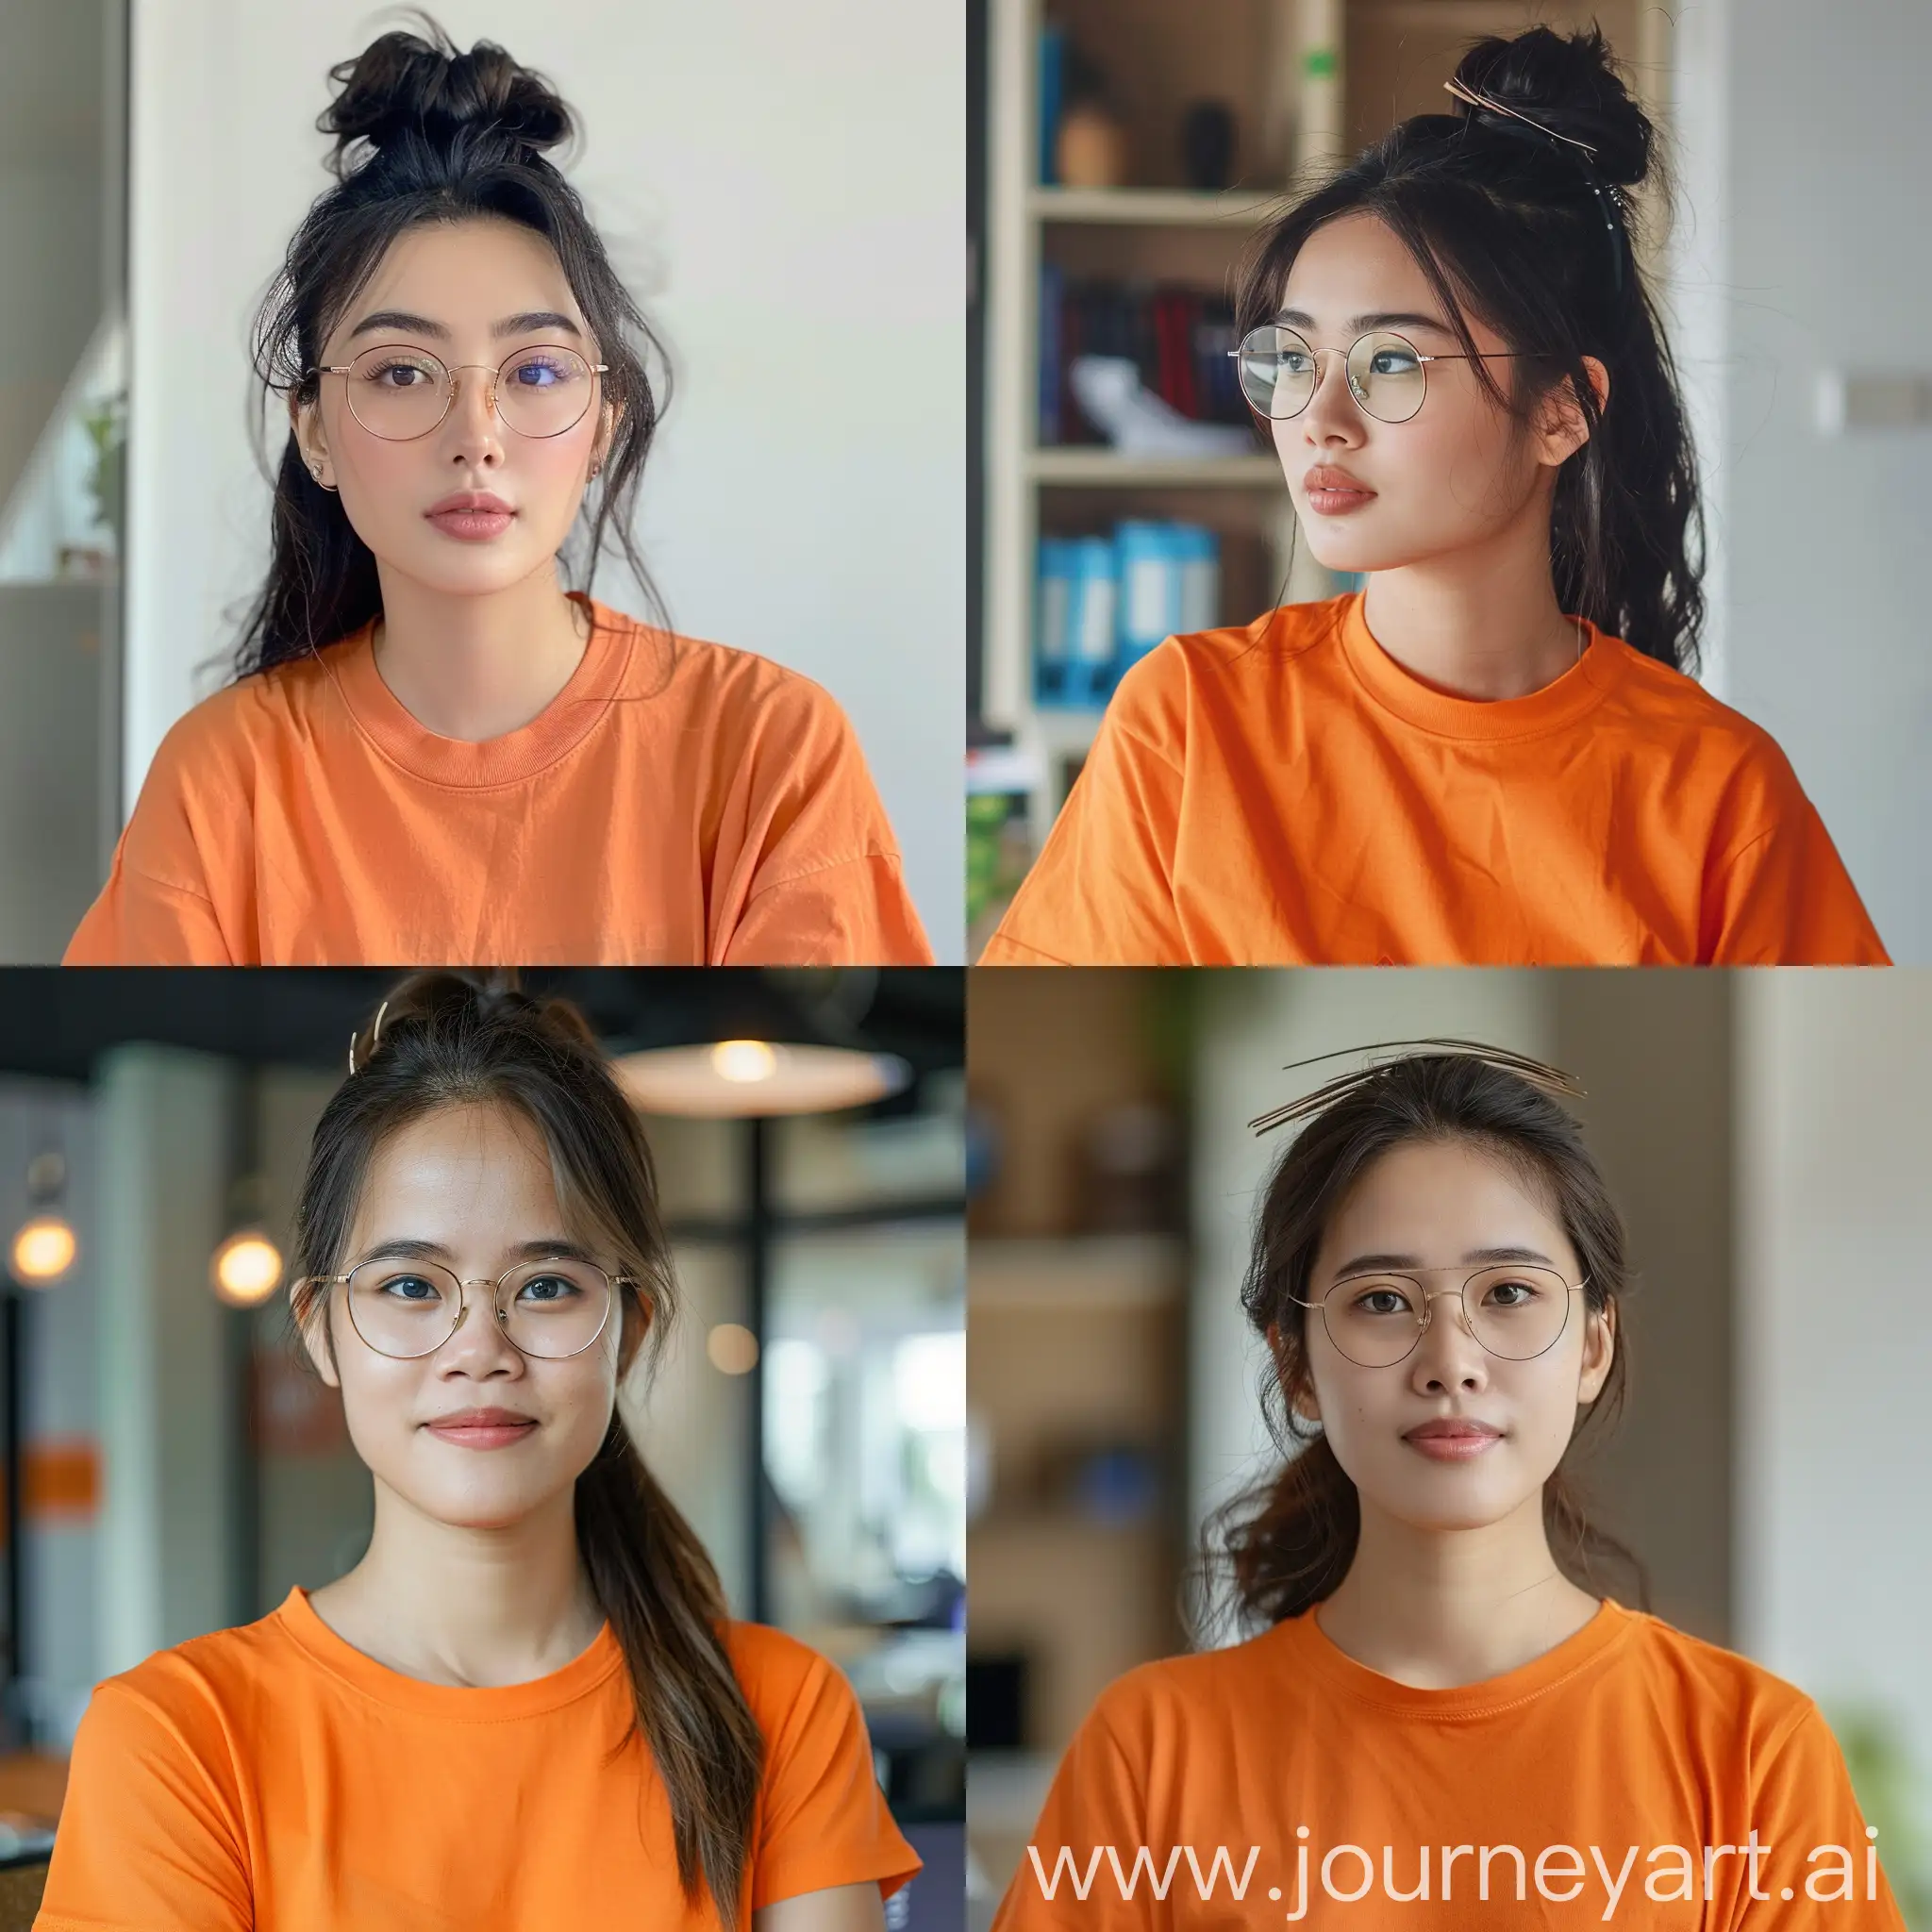 Vietnamese-Woman-in-Office-with-Glasses-and-Orange-TShirt